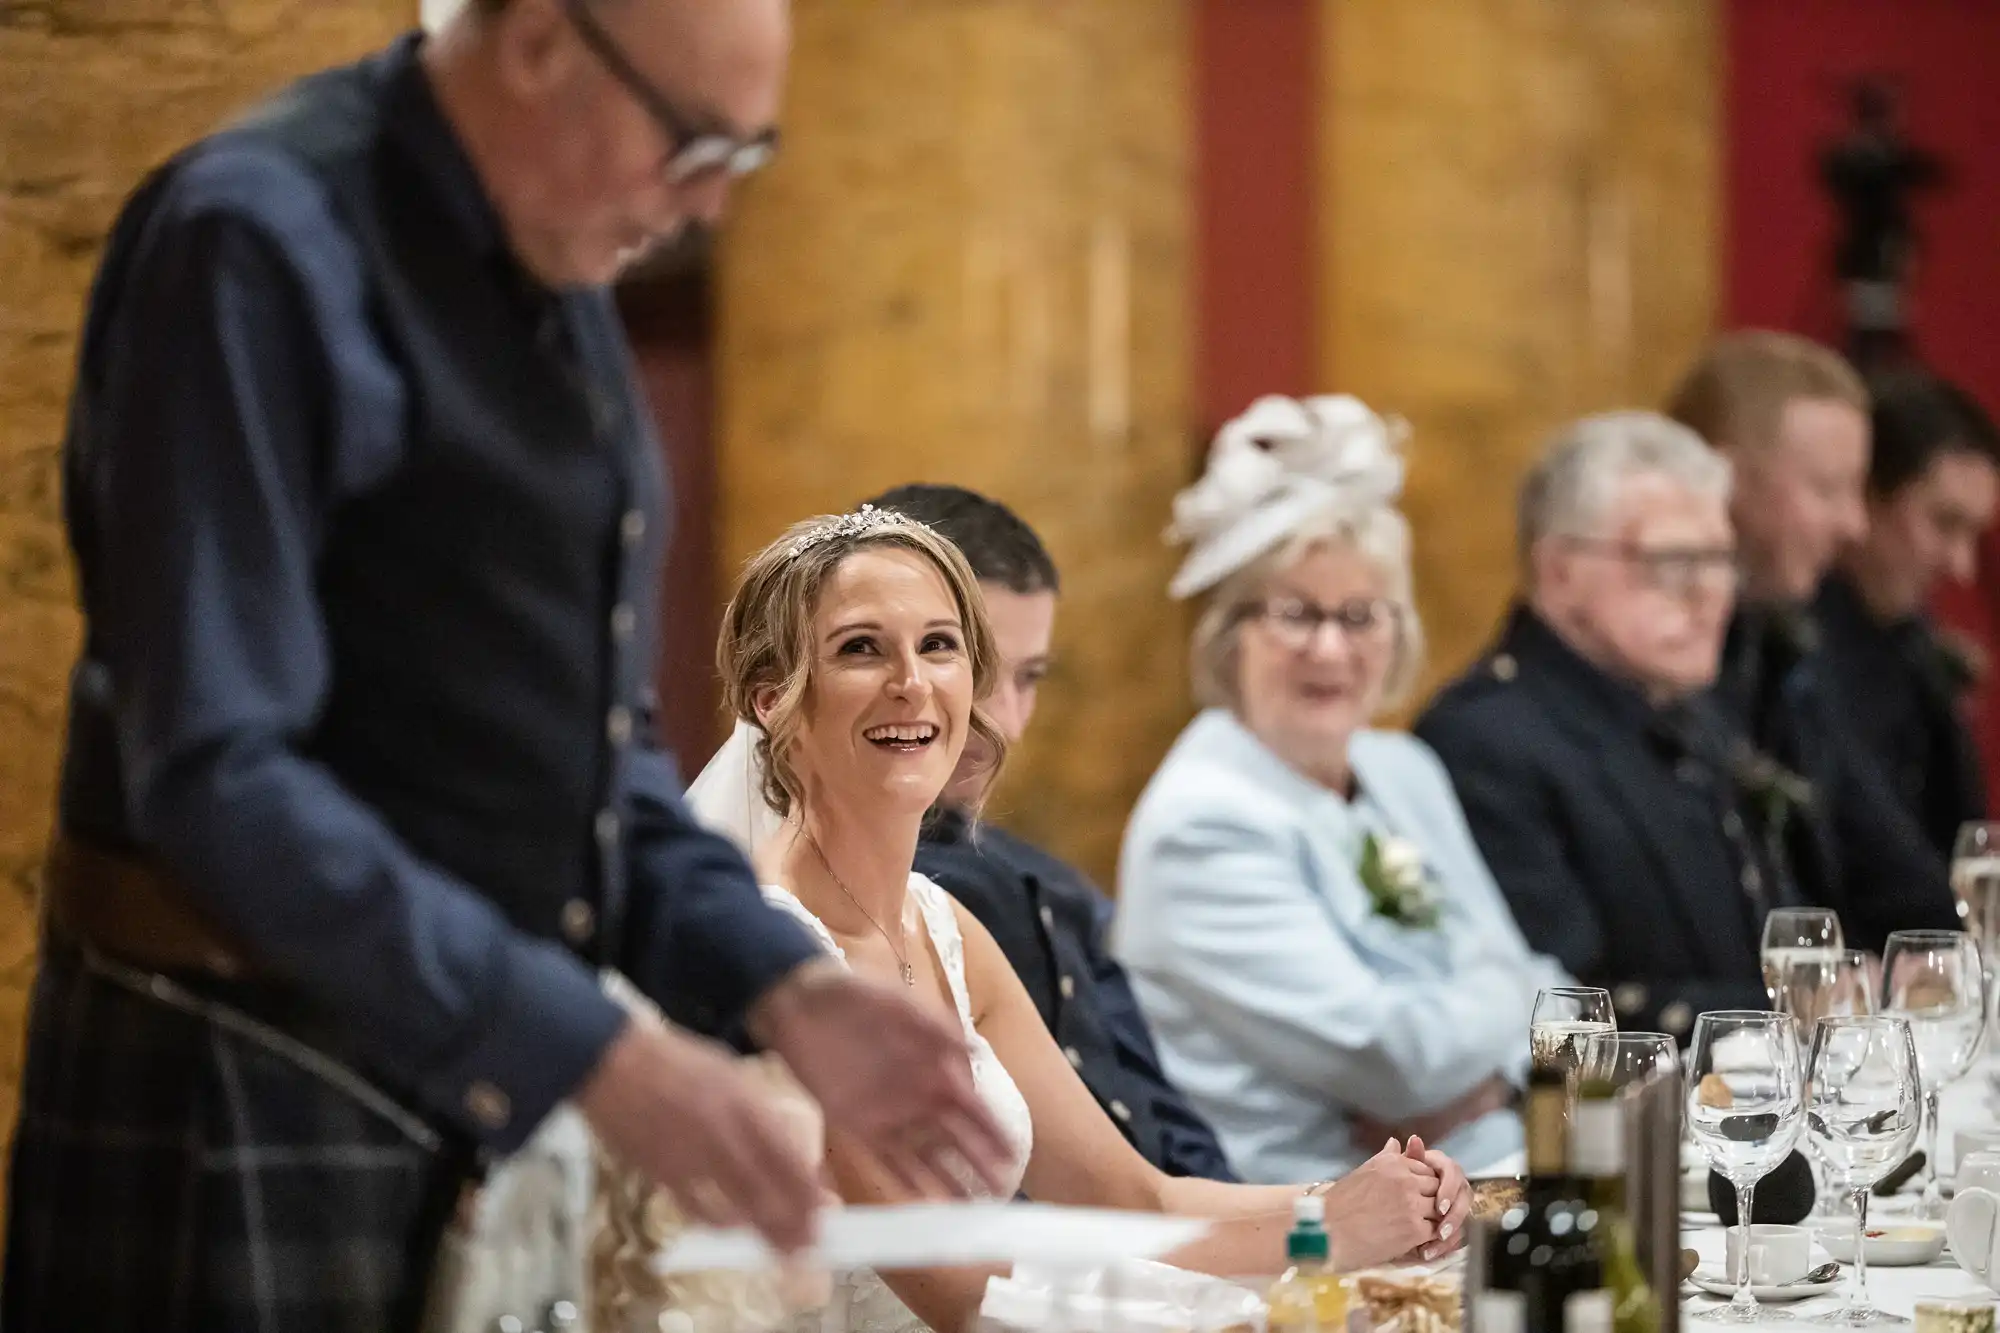 A bride sits smiling at a reception table, surrounded by guests. An older man stands and appears to be speaking, while other guests watch and listen.